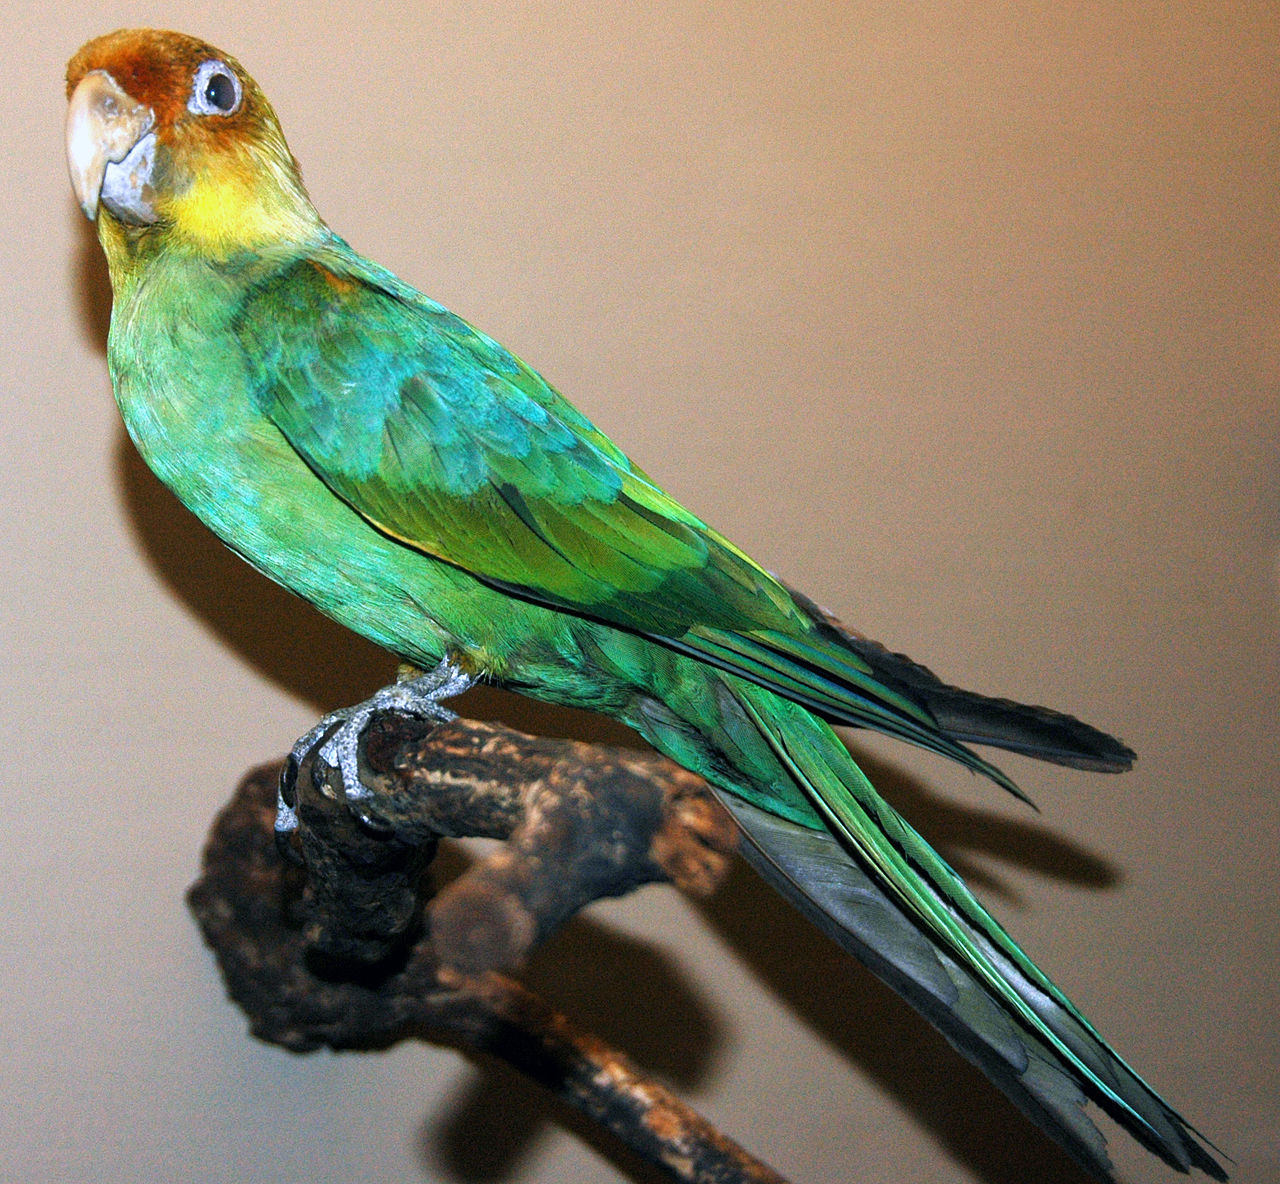 Mounted 'Conuropsis carolinensis' at the Field Museum of Natural History, Chicago